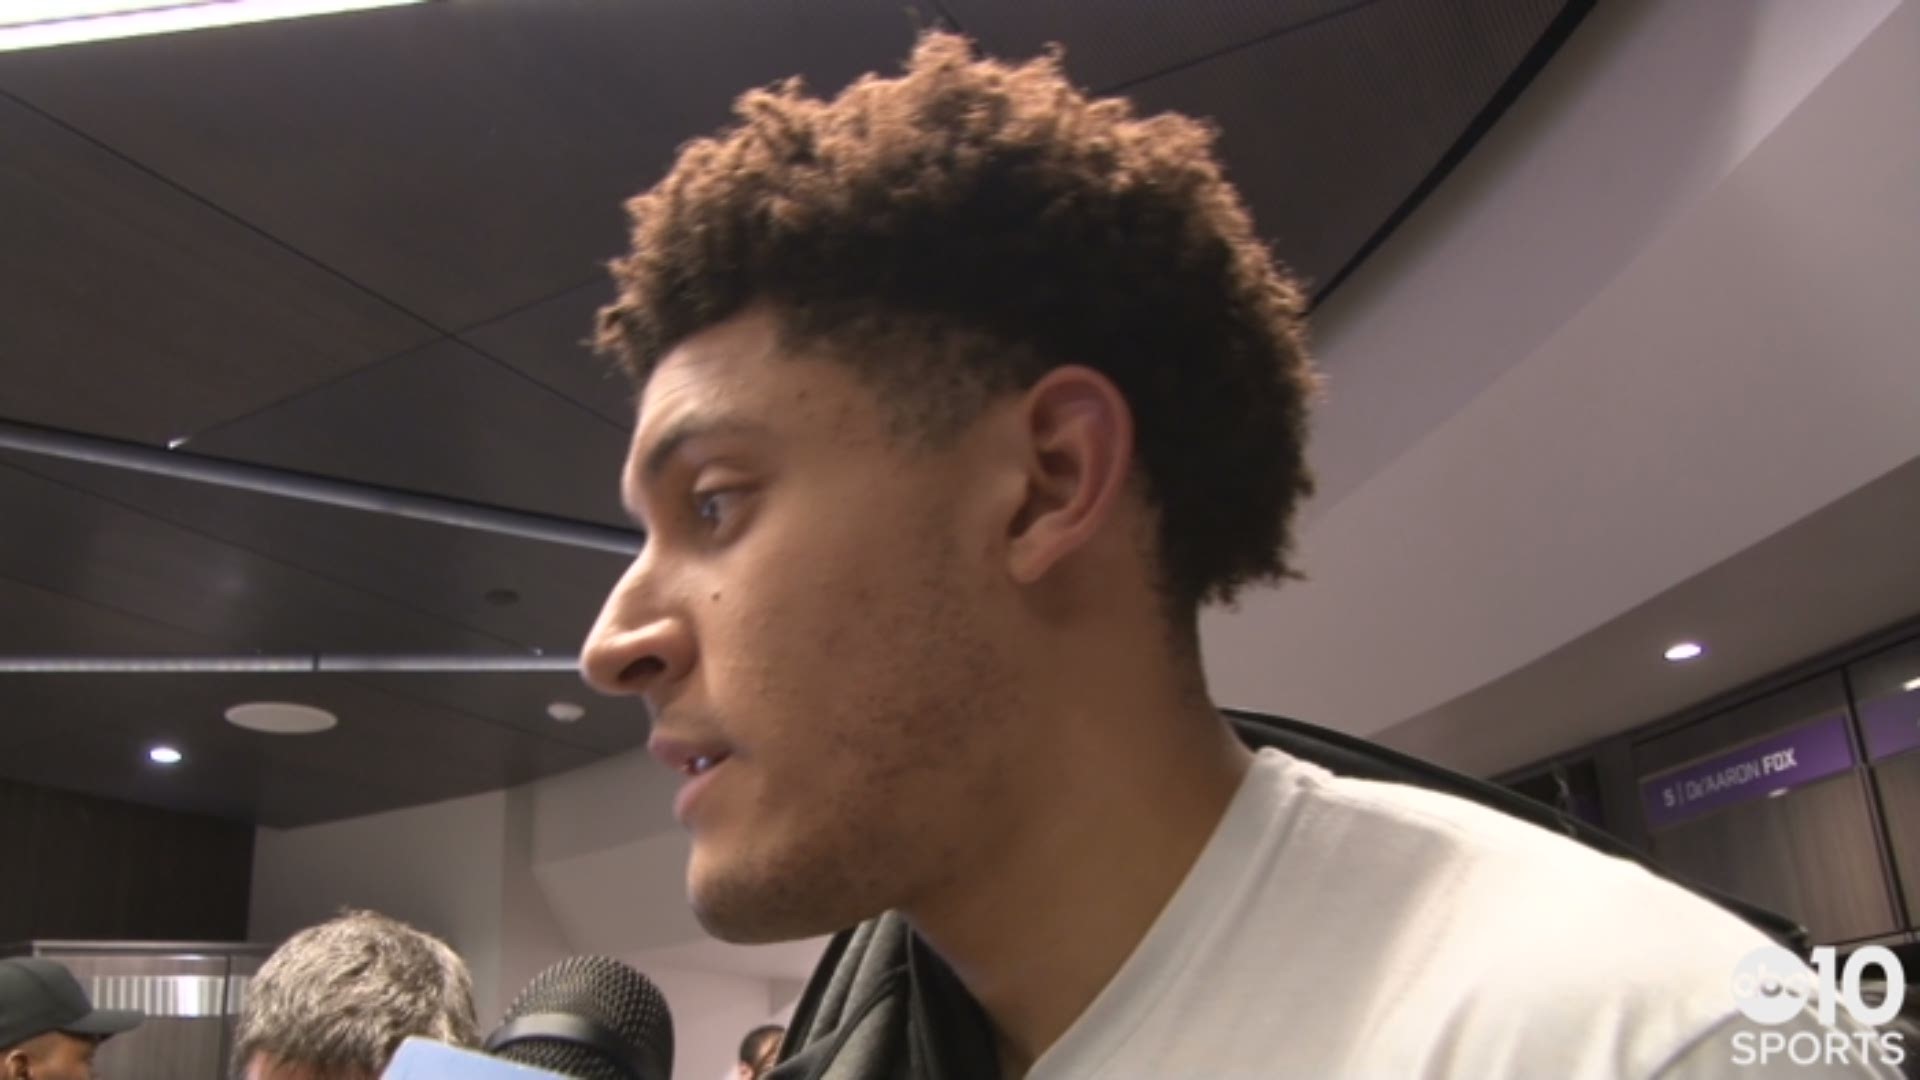 Kings rookie forward Justin Jackson discusses his rookie season in Sacramento and the outlook for the future of his team, following 96-83 victory in the season finale over the Houston Rockets.